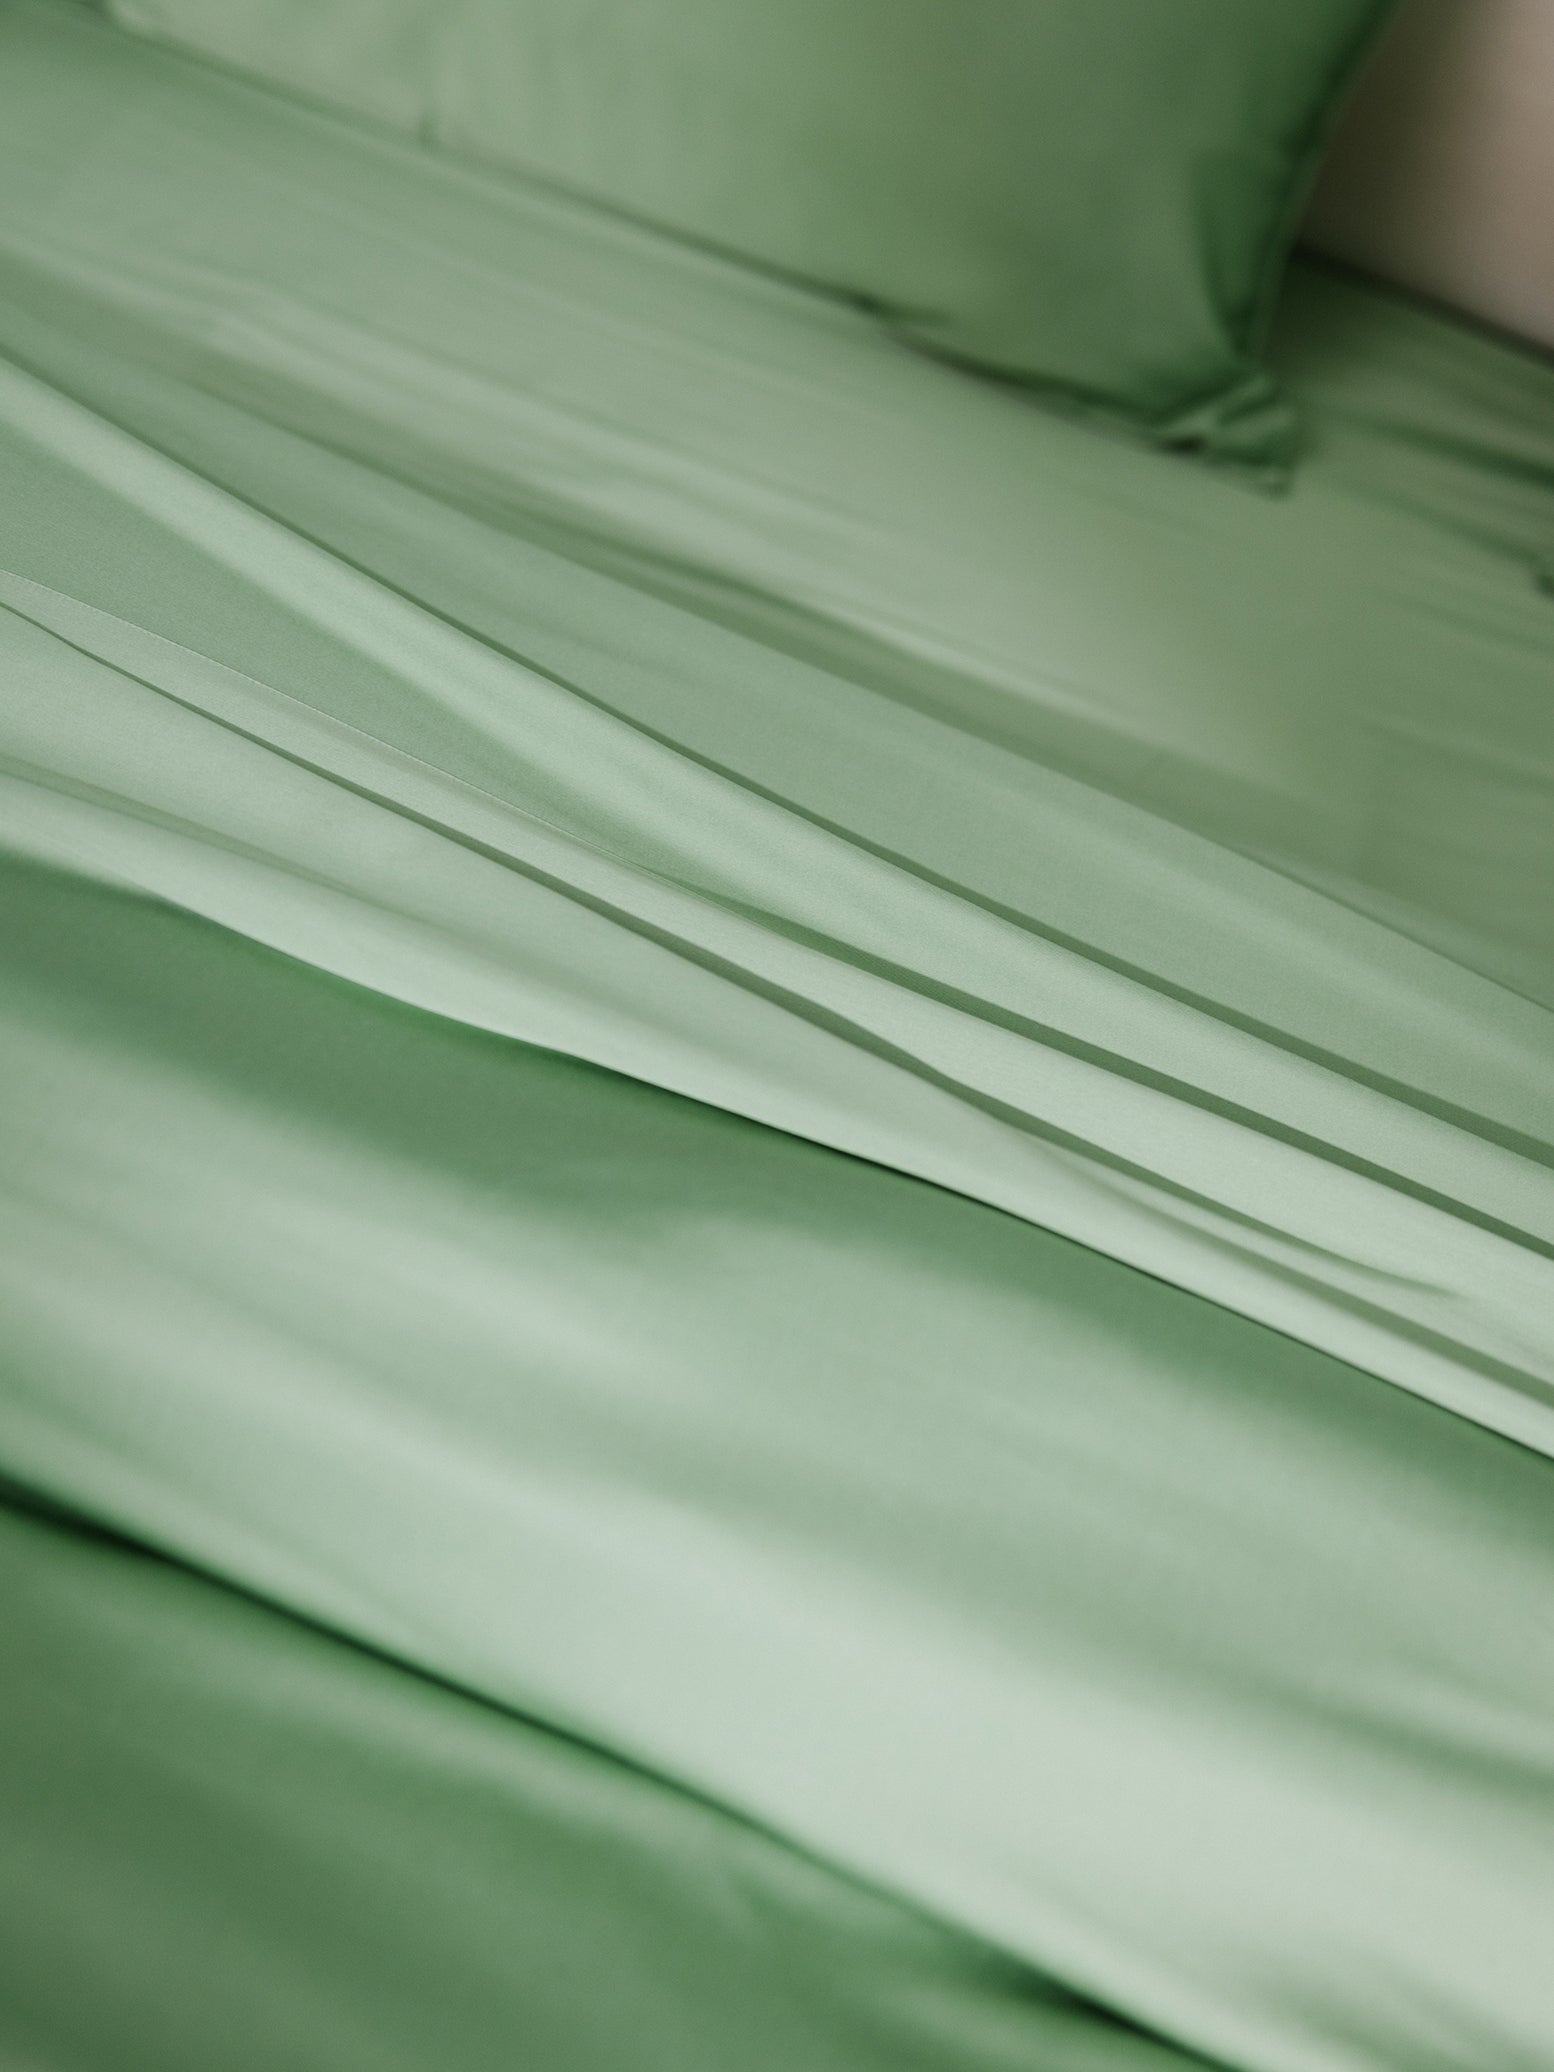 Fern Sheets on bed. Photo taken close up. 